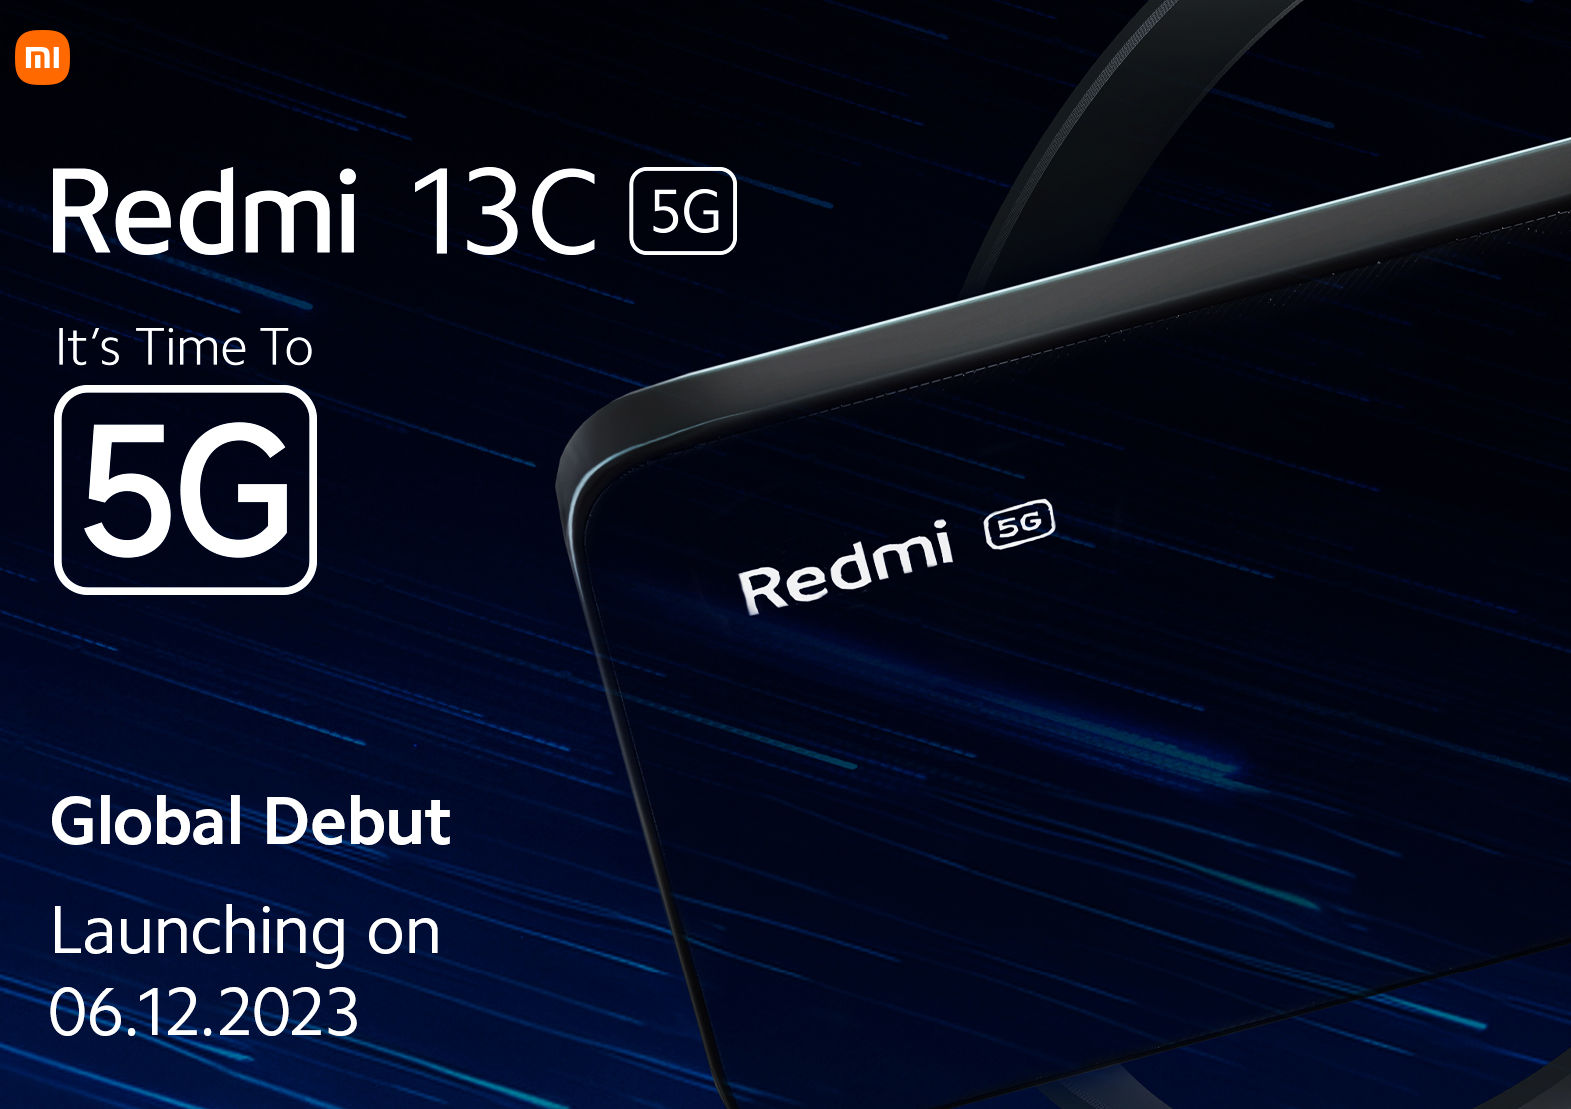 Redmi 13C, 13C 5G launched - Check price, specs and sale date